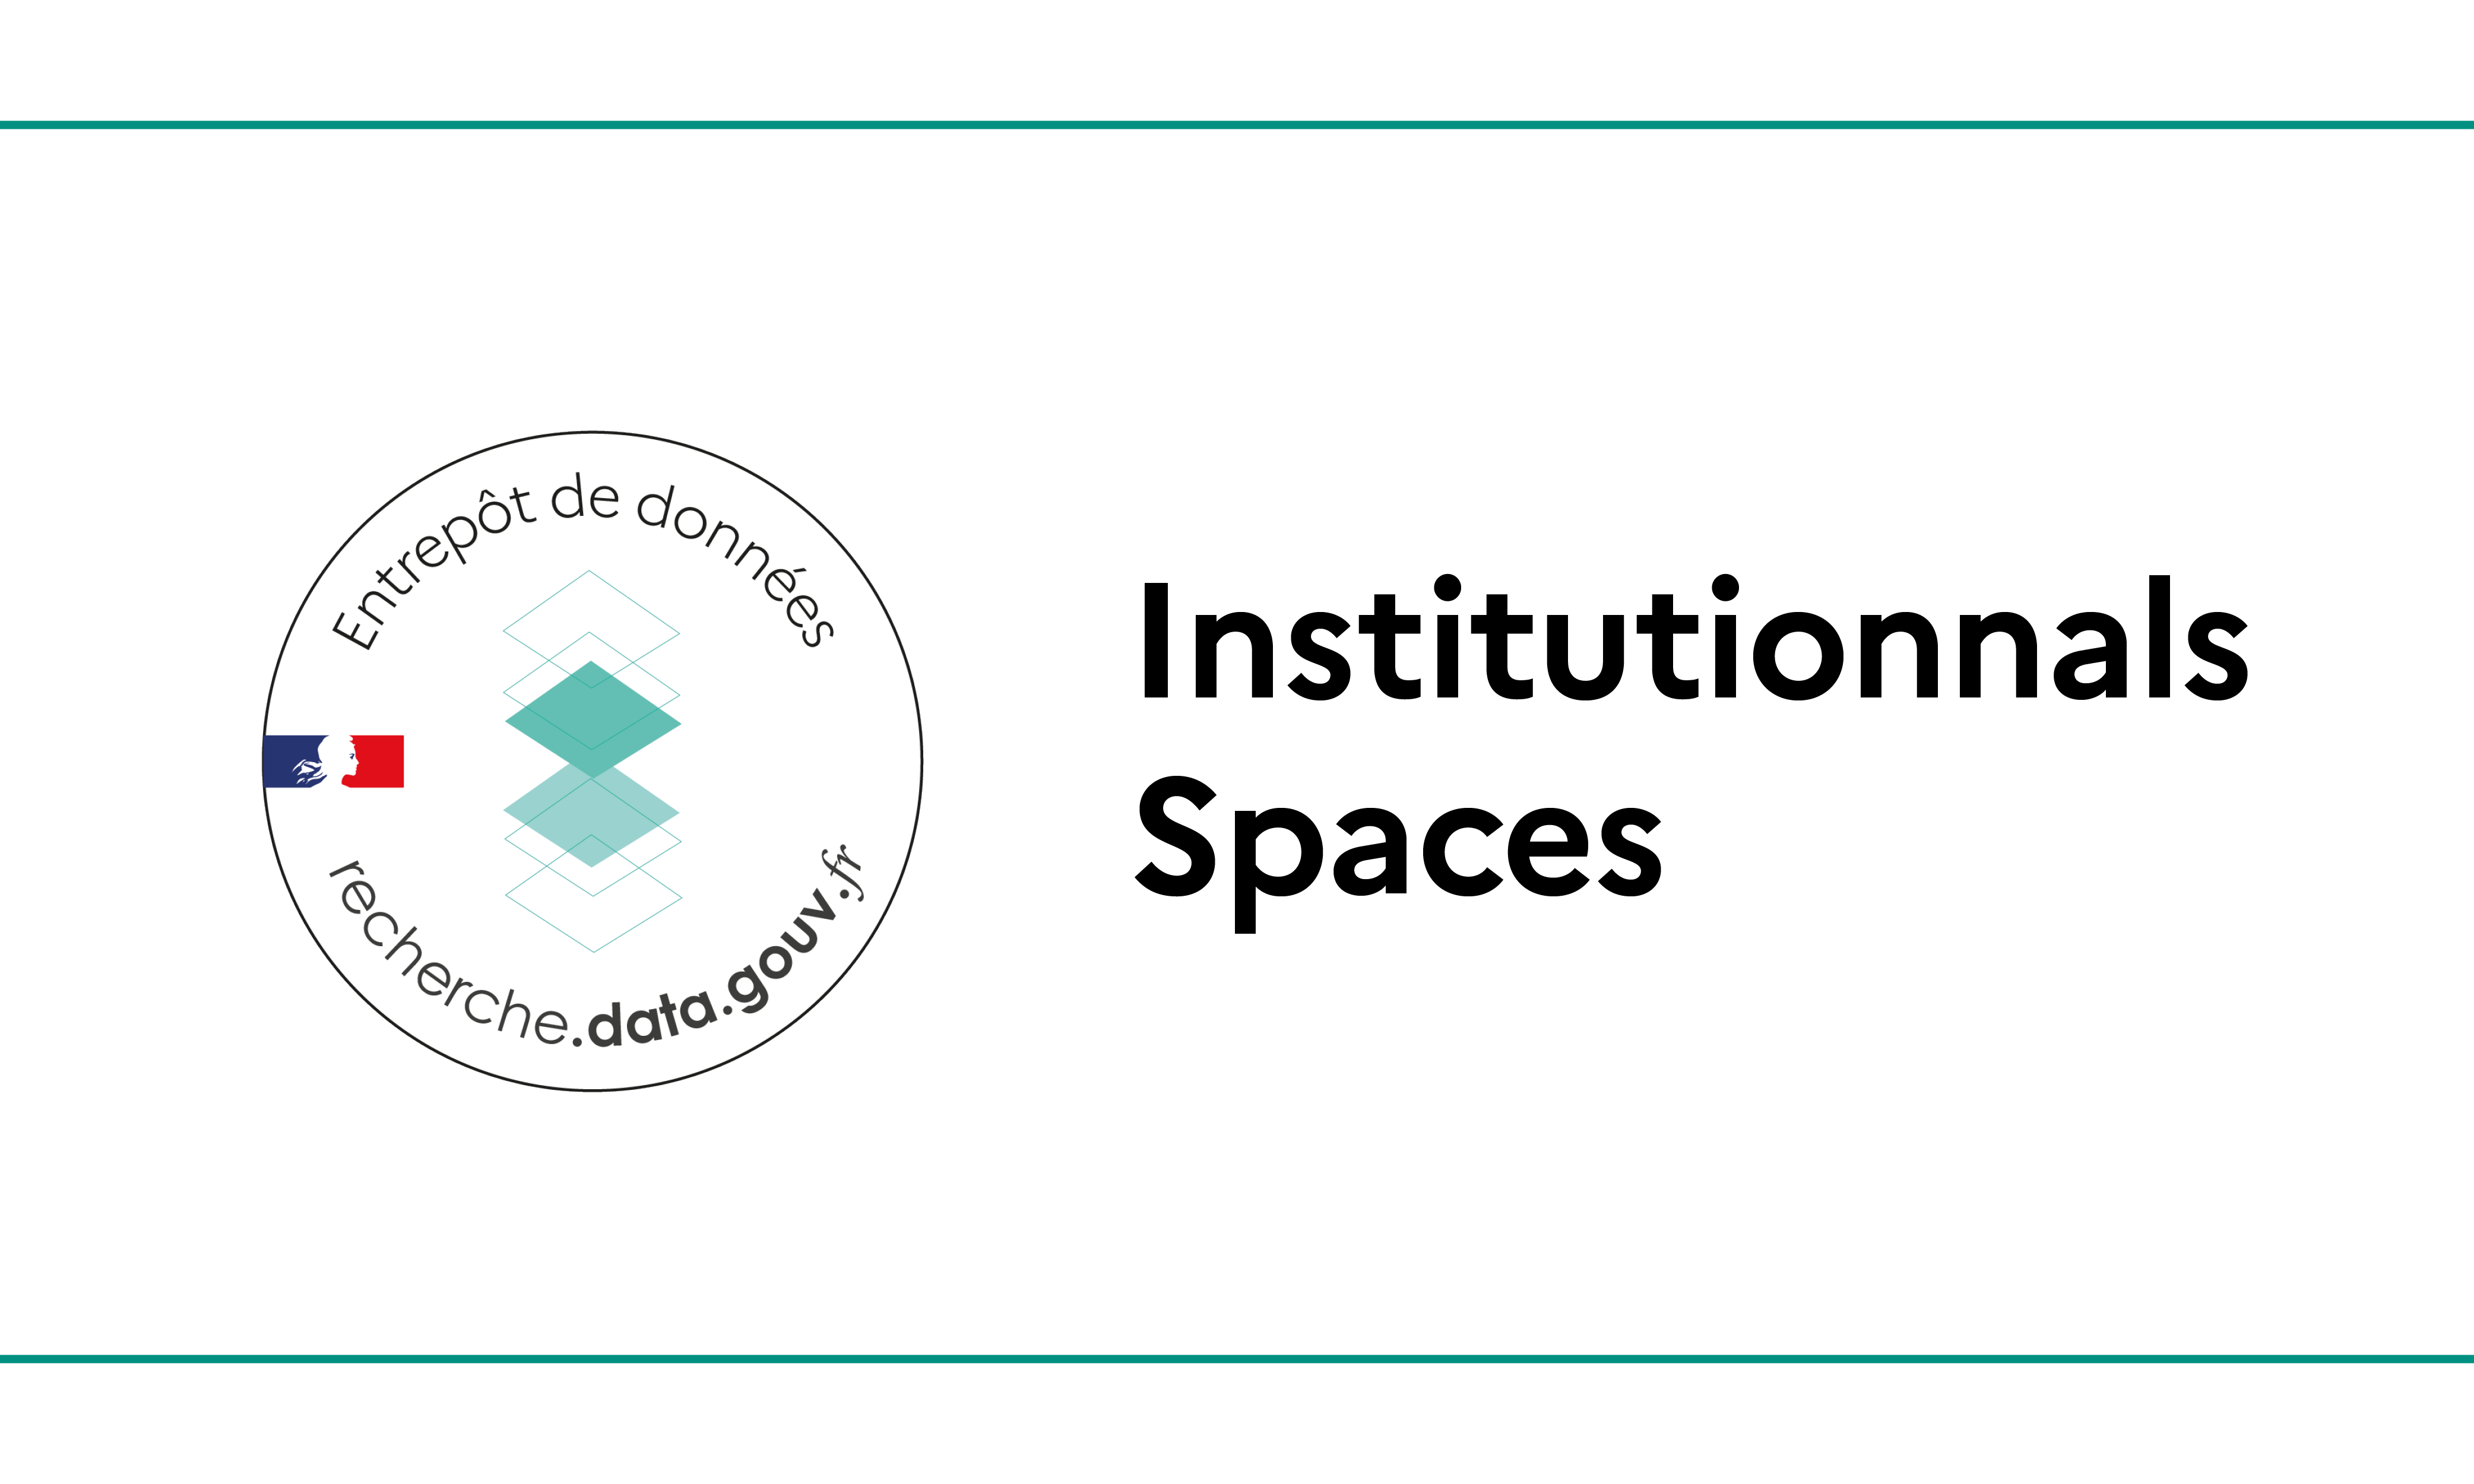 Does your establishment have its own dedicated institutional space on Recherche Data Gouv?